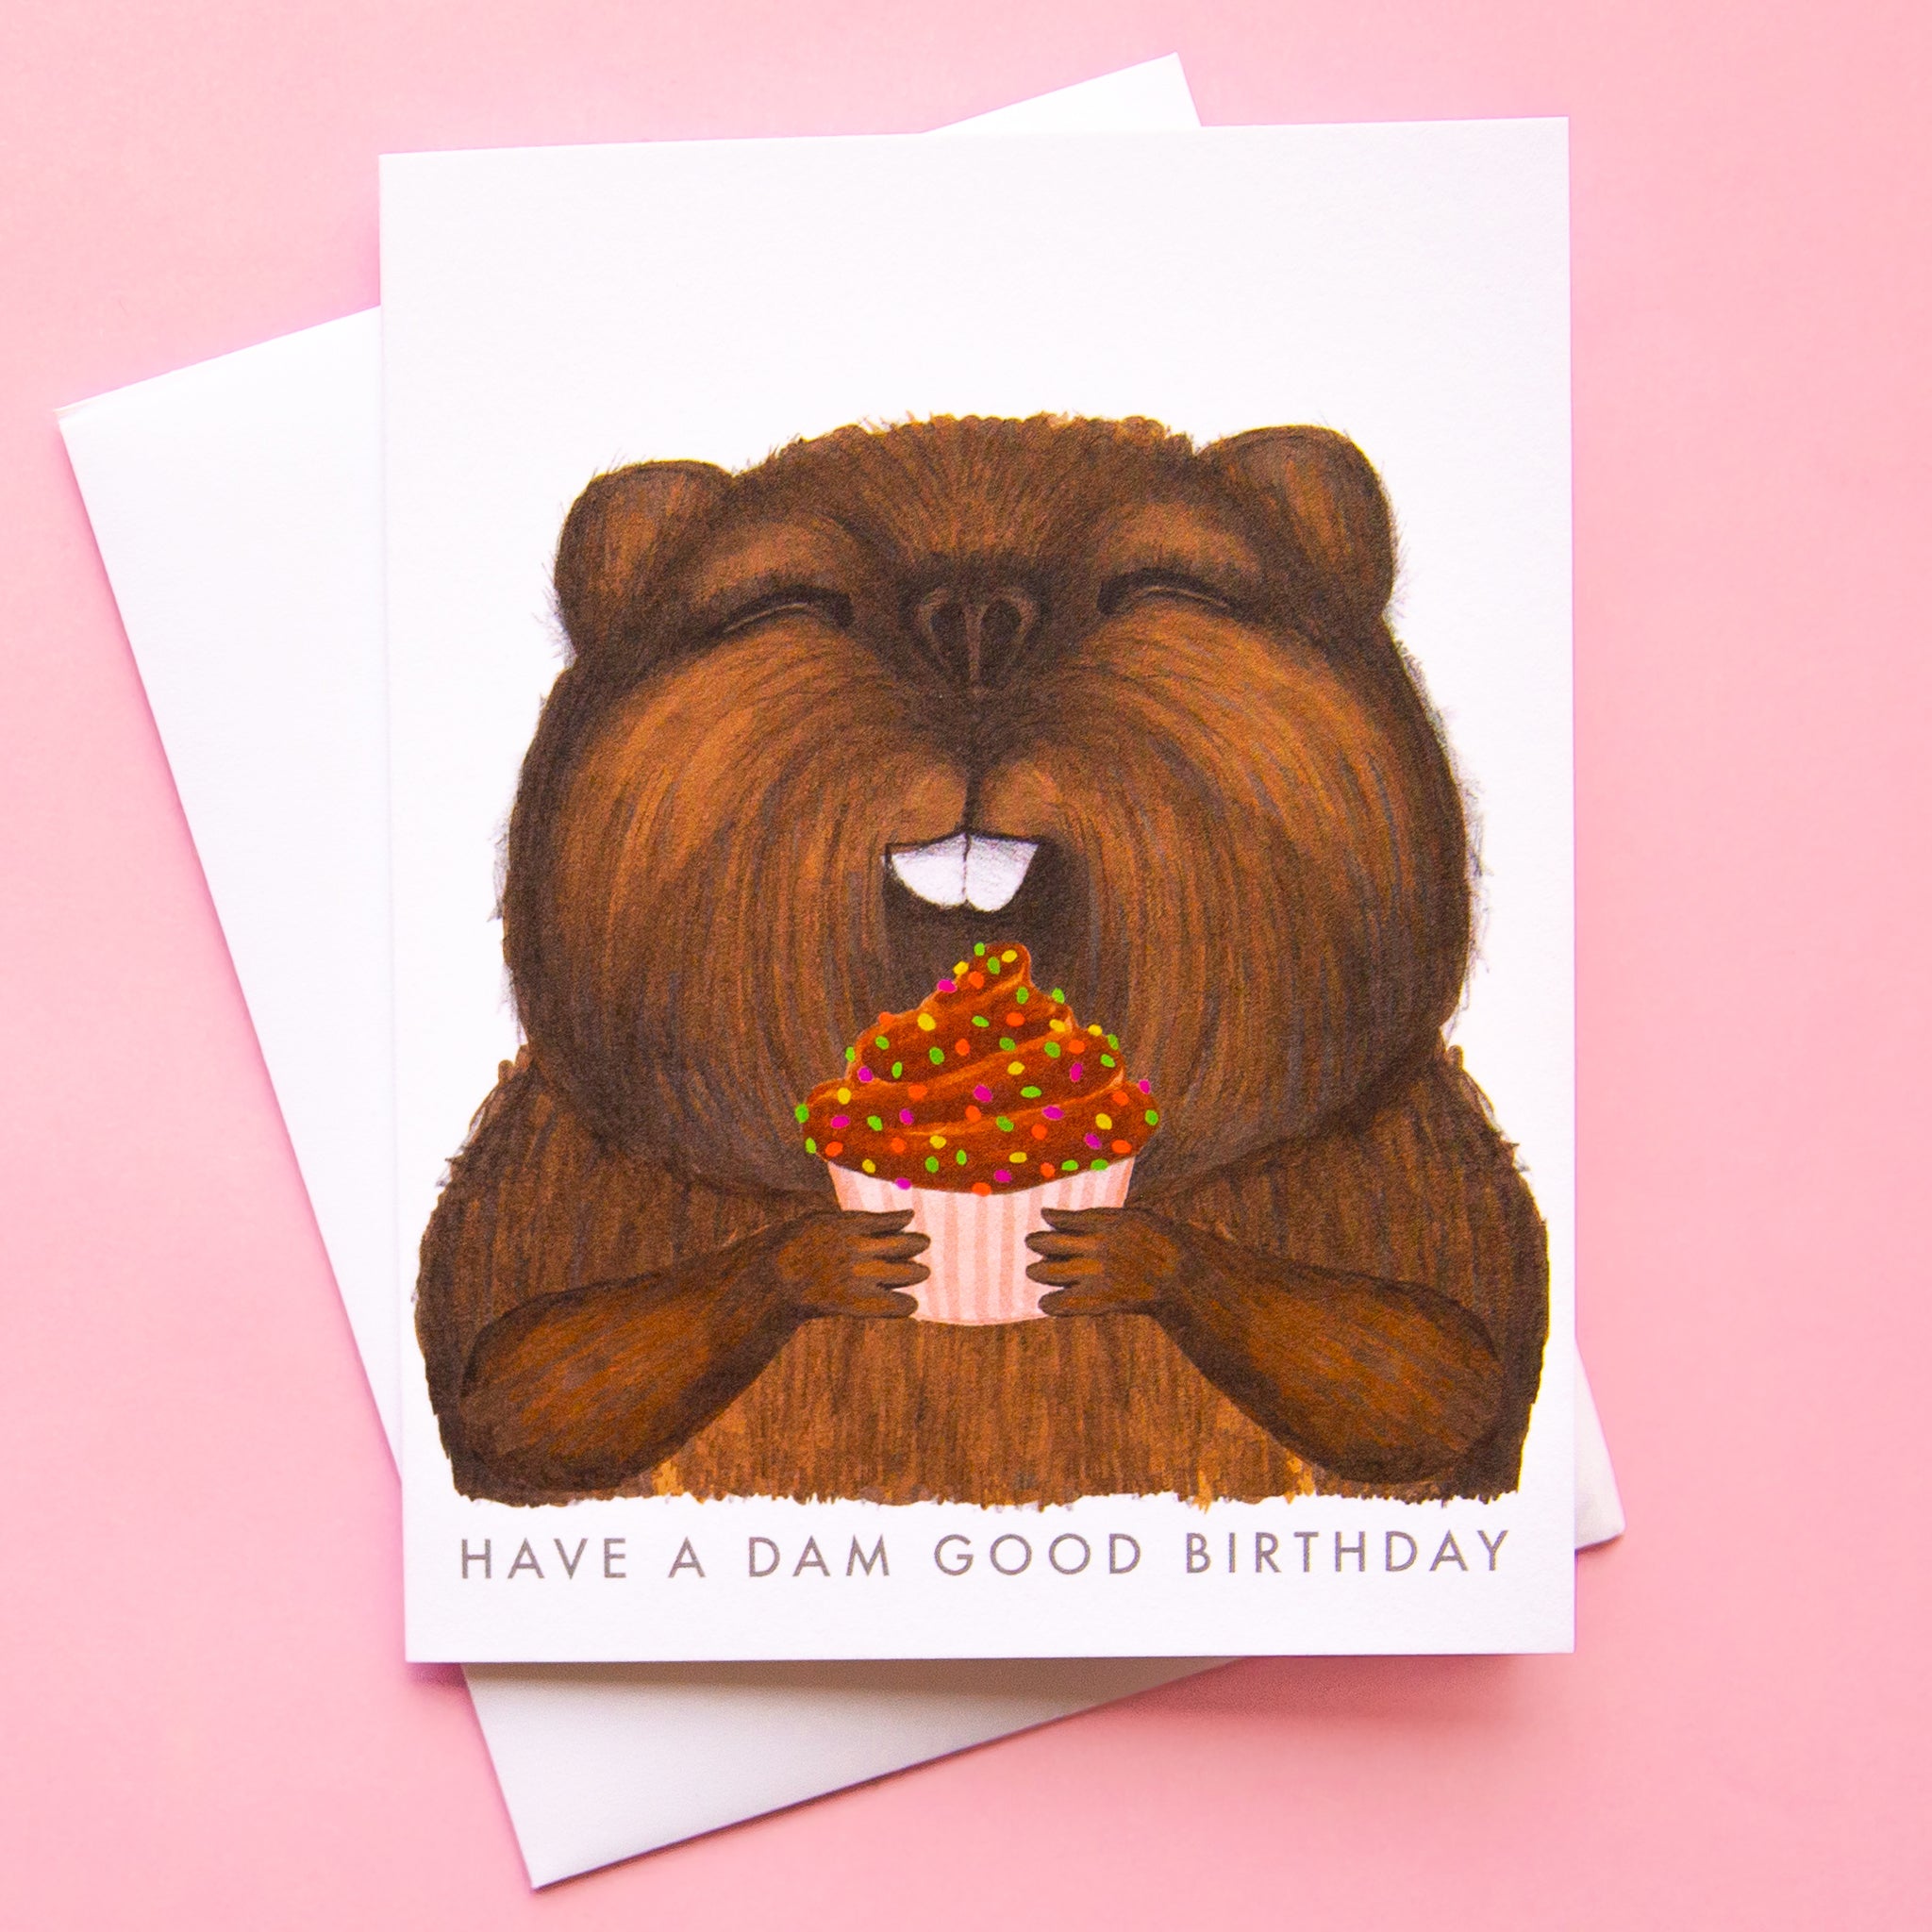 On a pink background is a white card with an illustration of a brown beaver eating a cupcake and text below that reads, "Have A Dam Good Birthday". 